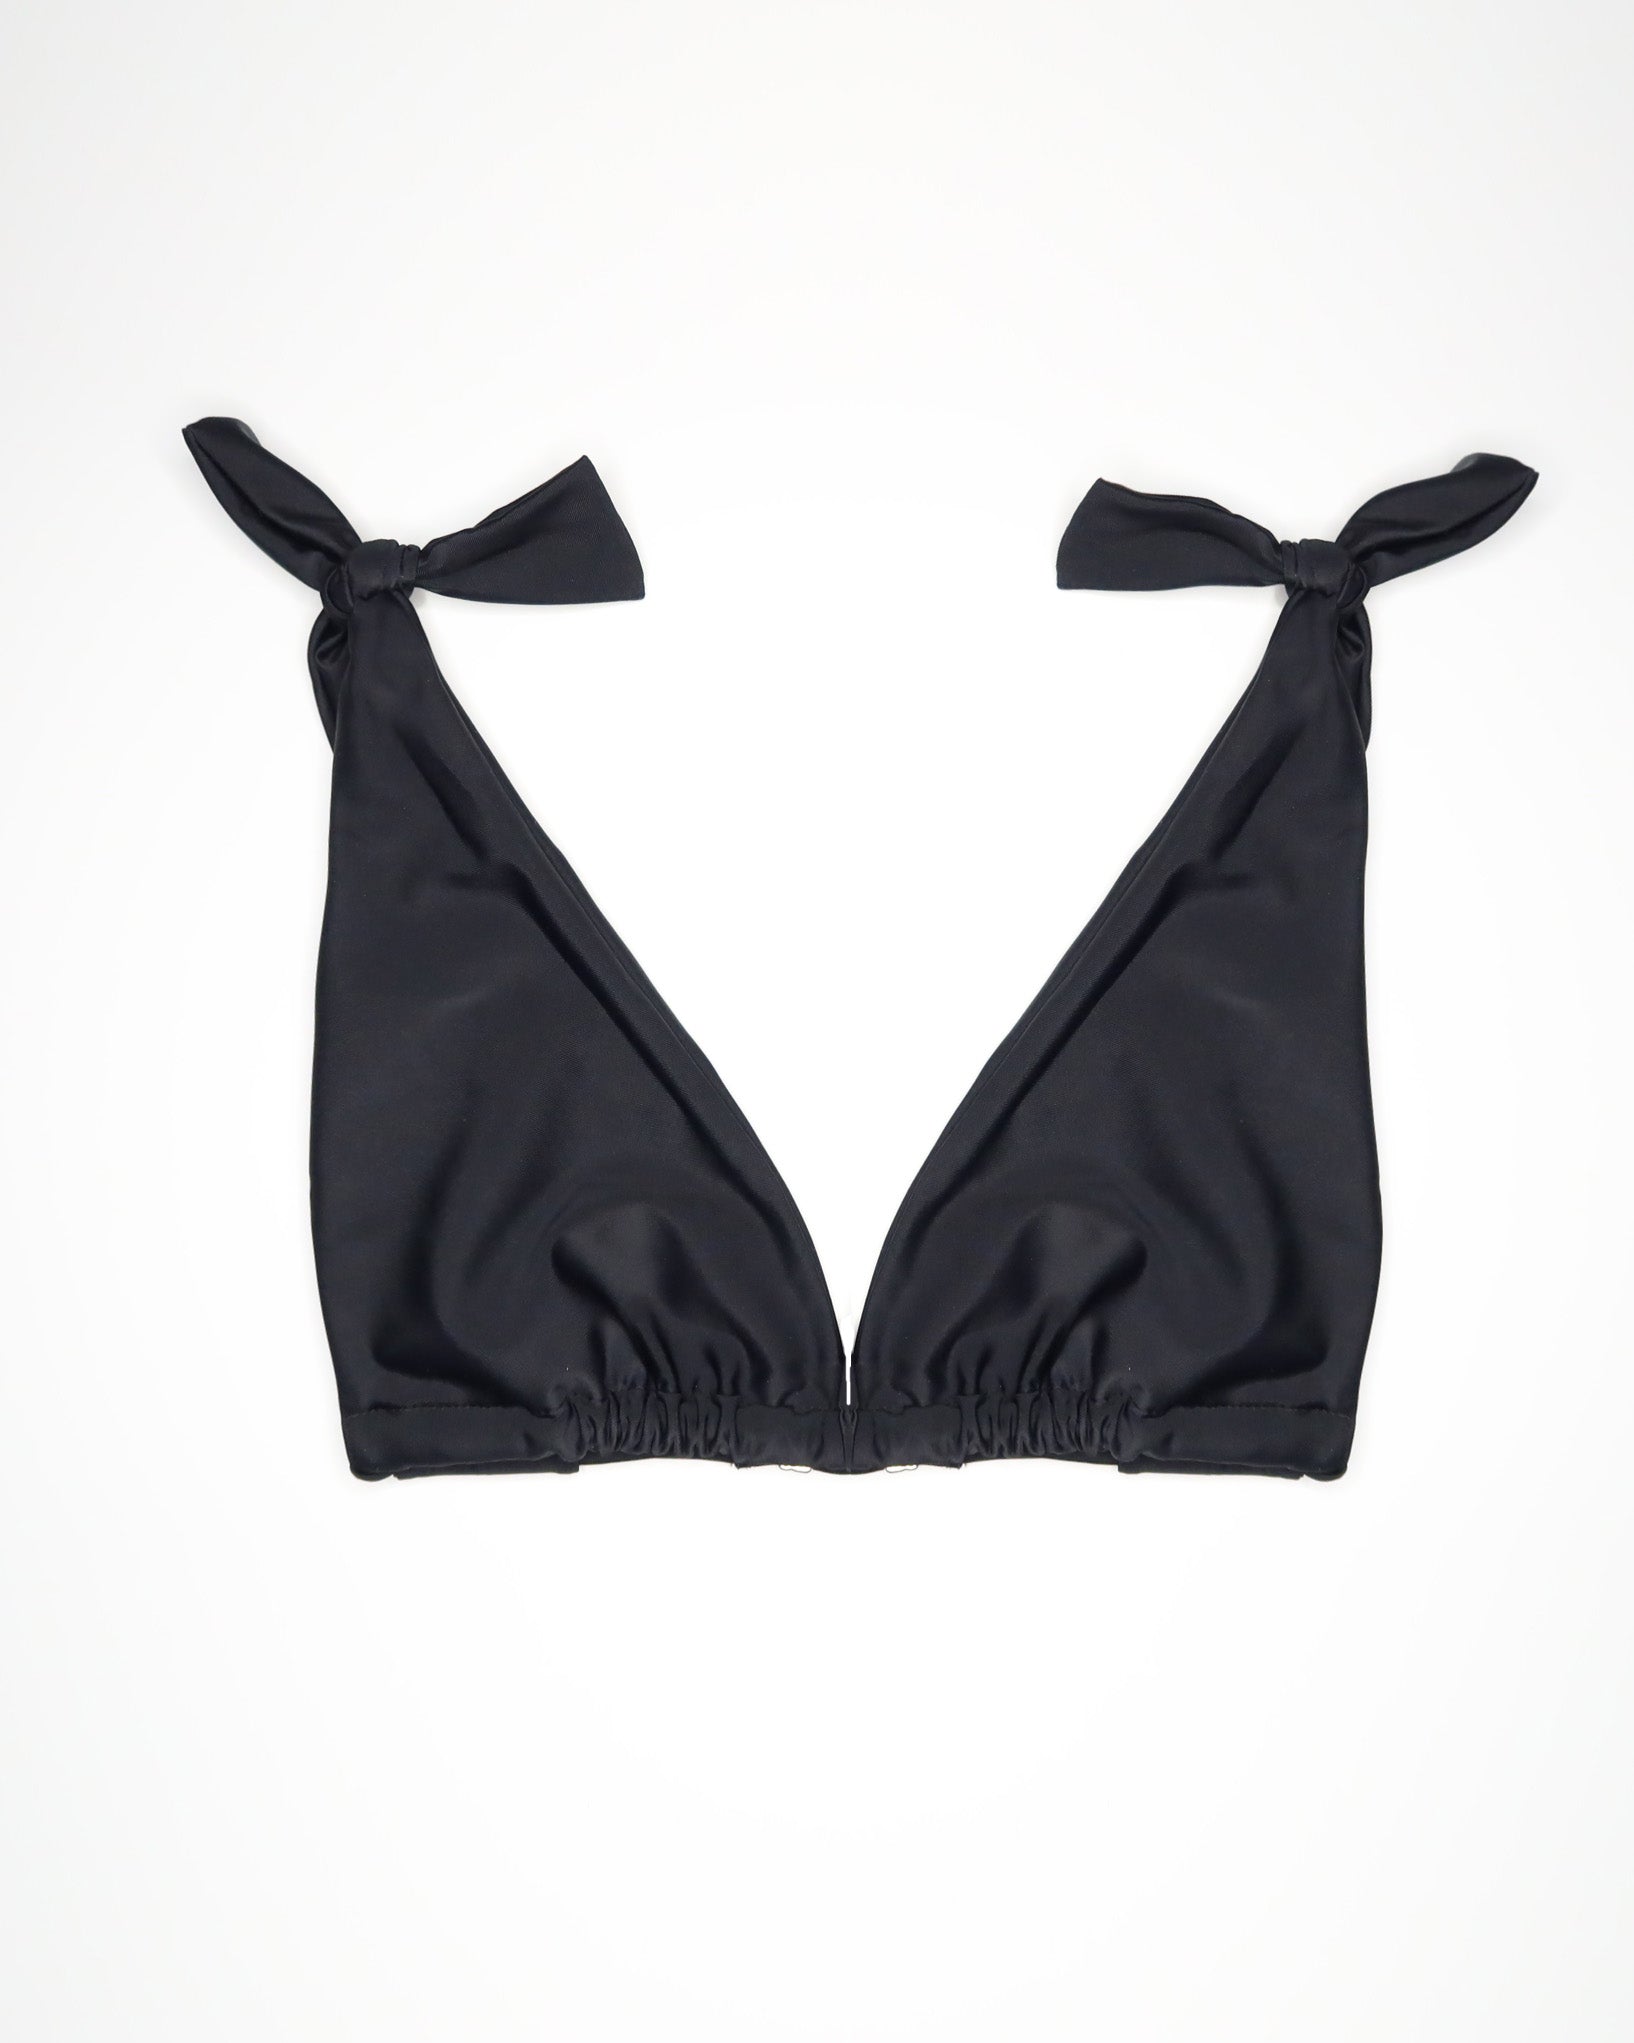 Nikki Tie Top in Black - MARY YOUNG